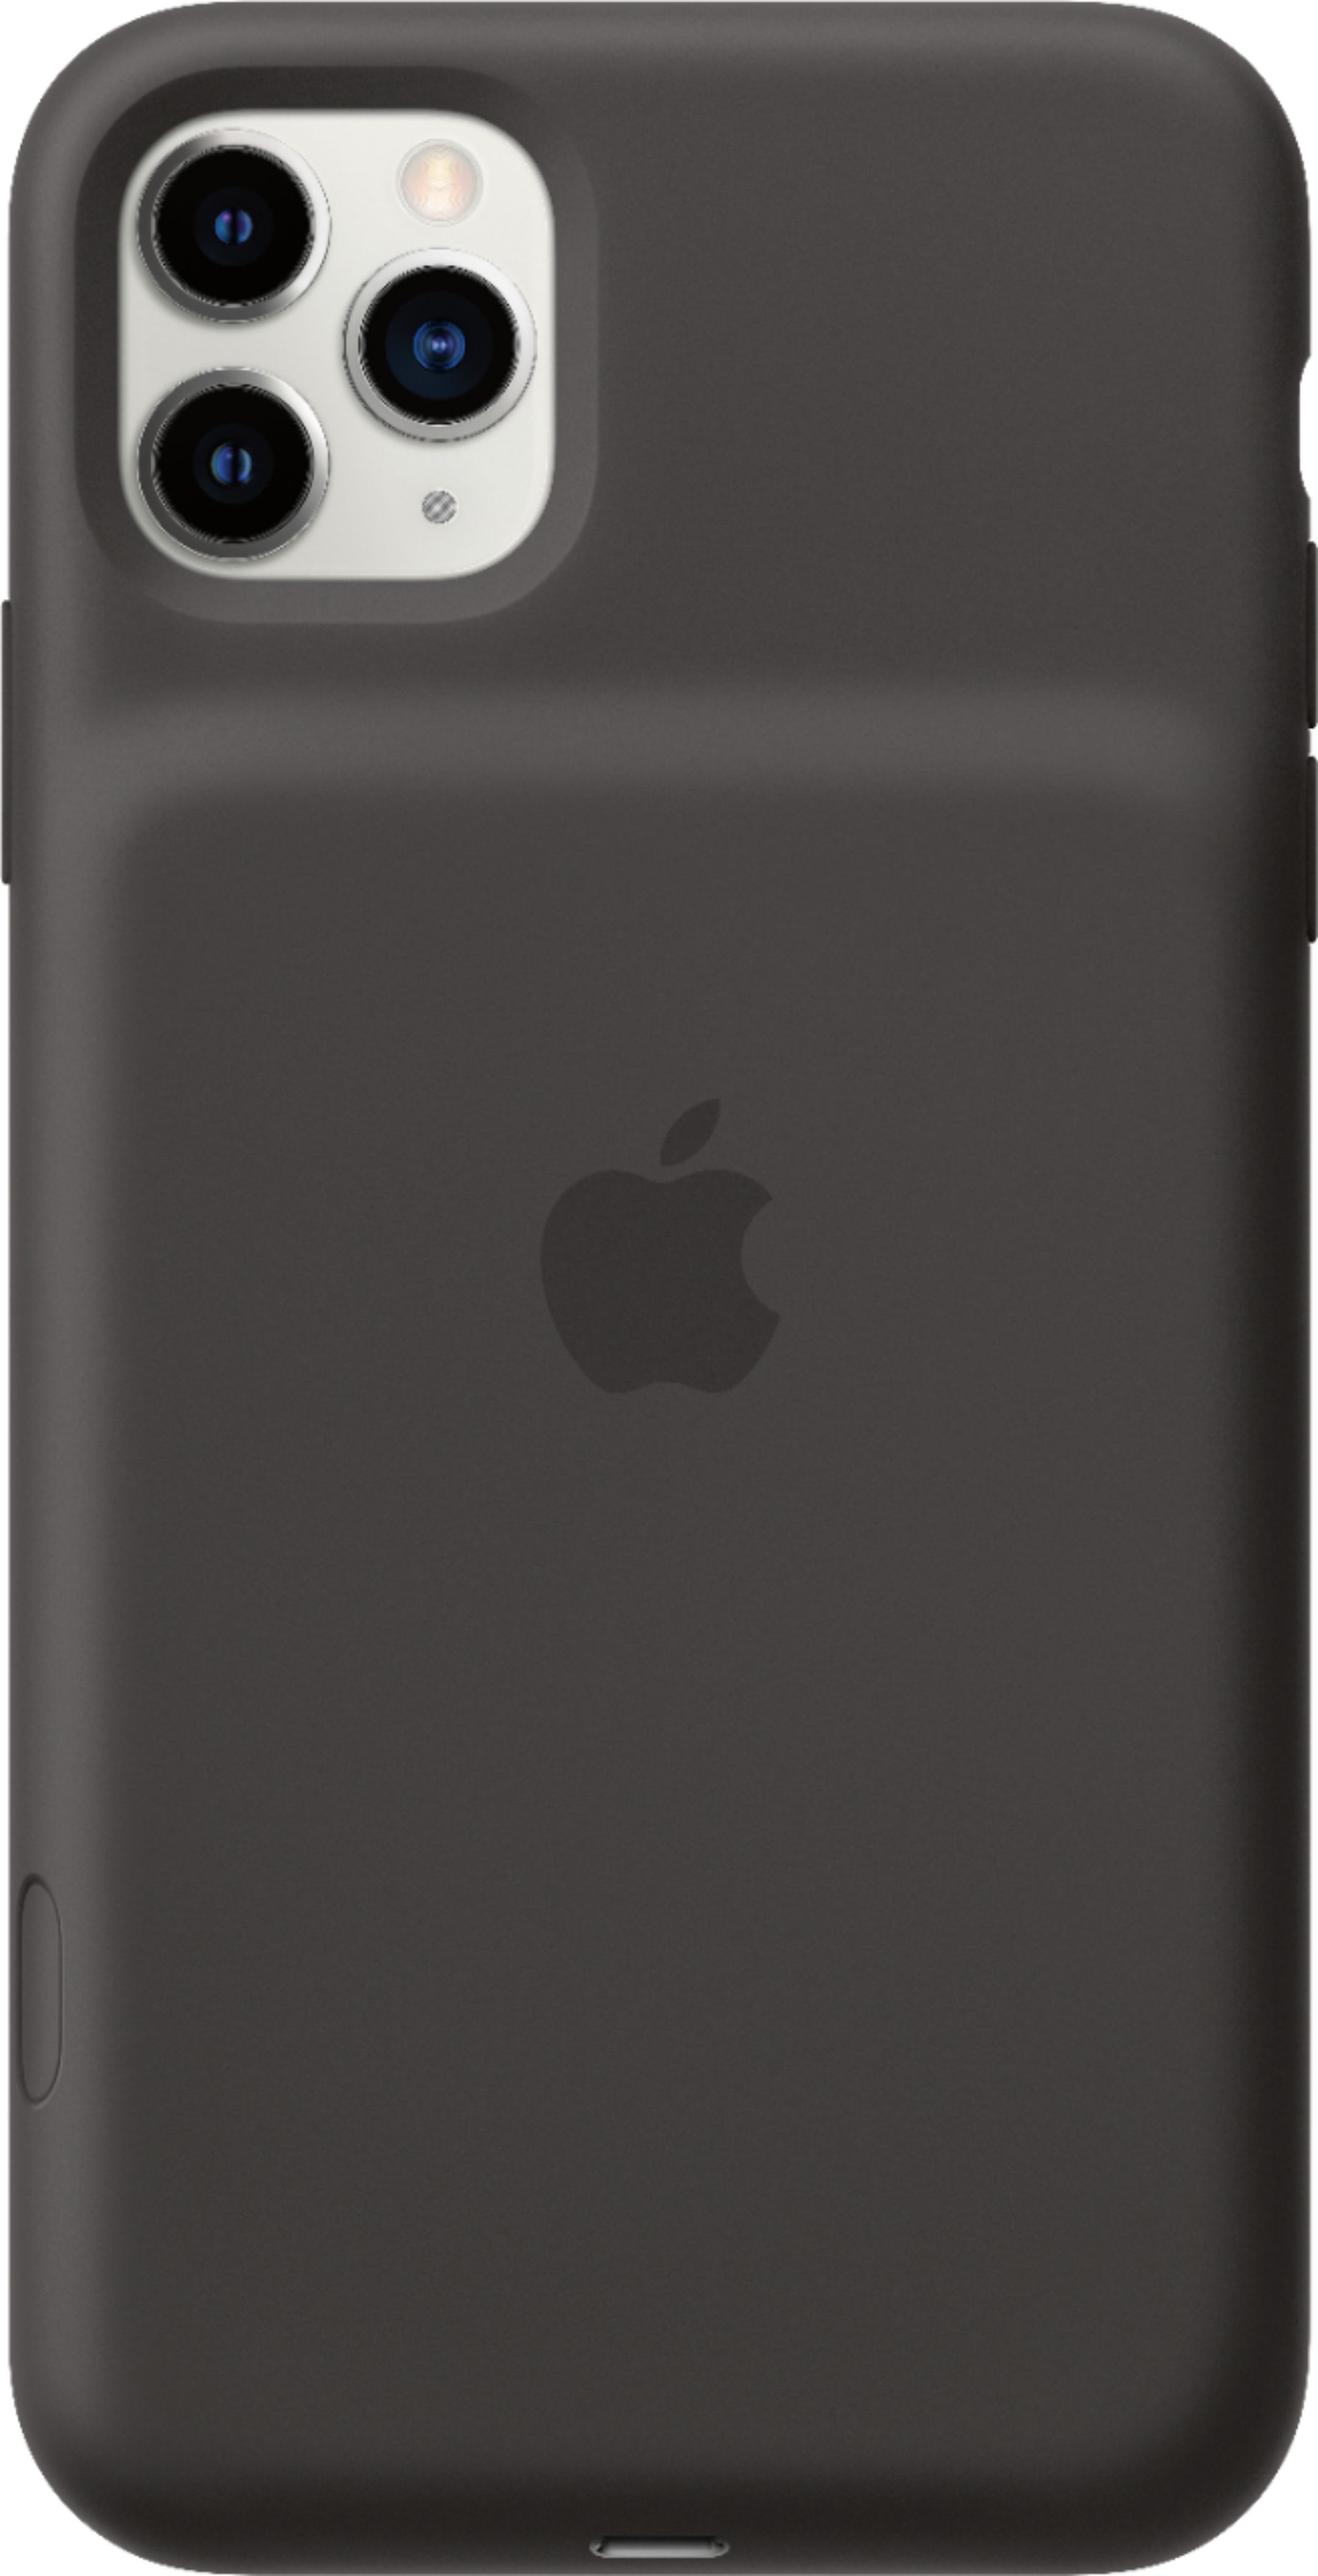 Best Buy: Apple iPhone 11 Pro Max Smart Battery Case Black MWVP2LL/A